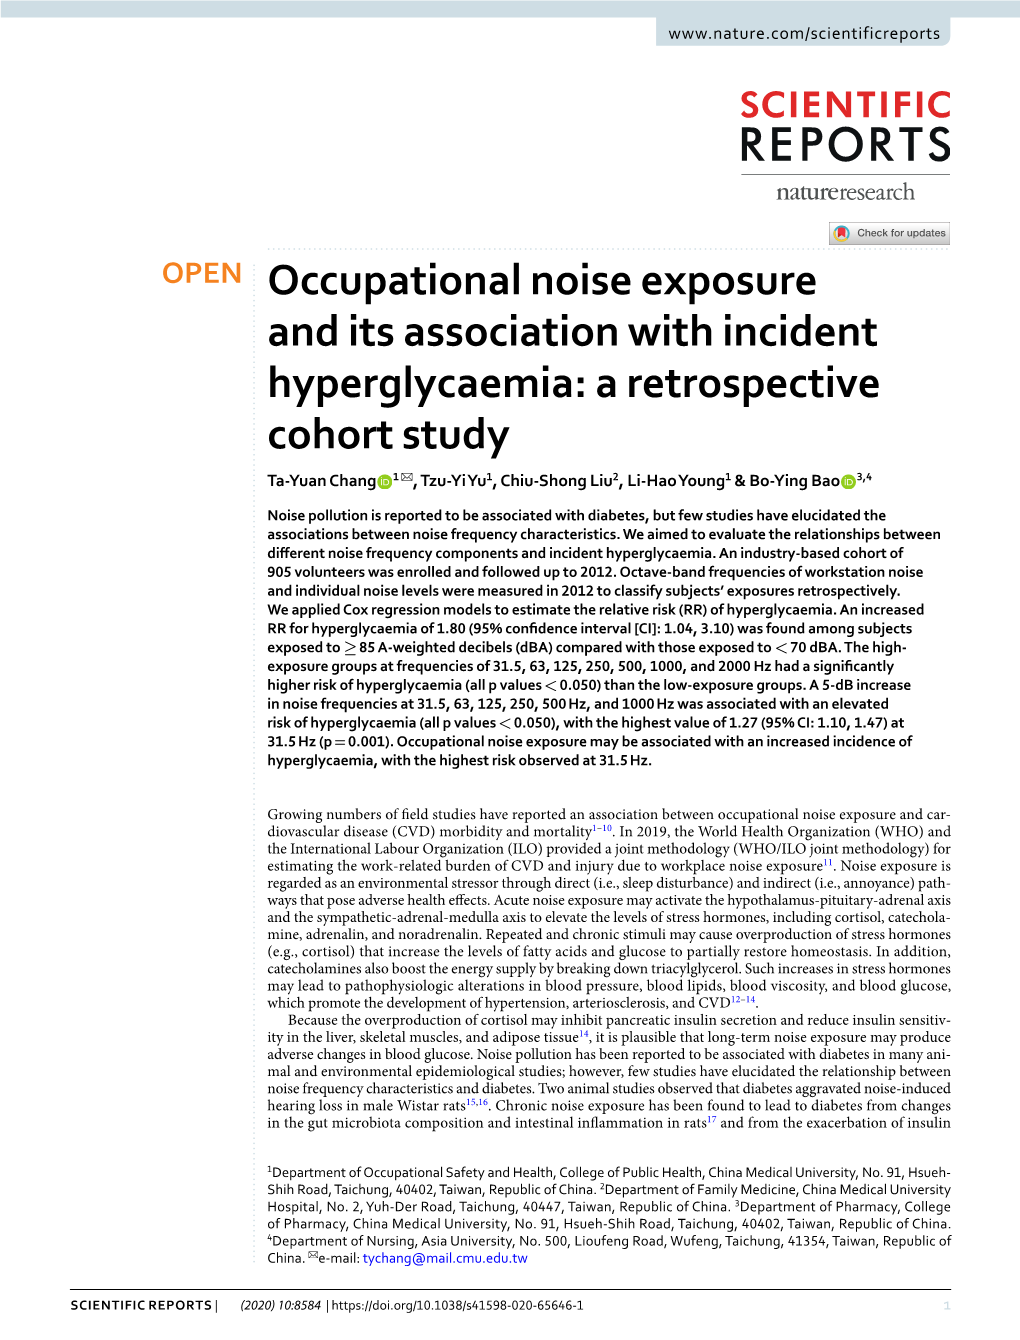 Occupational Noise Exposure and Its Association with Incident